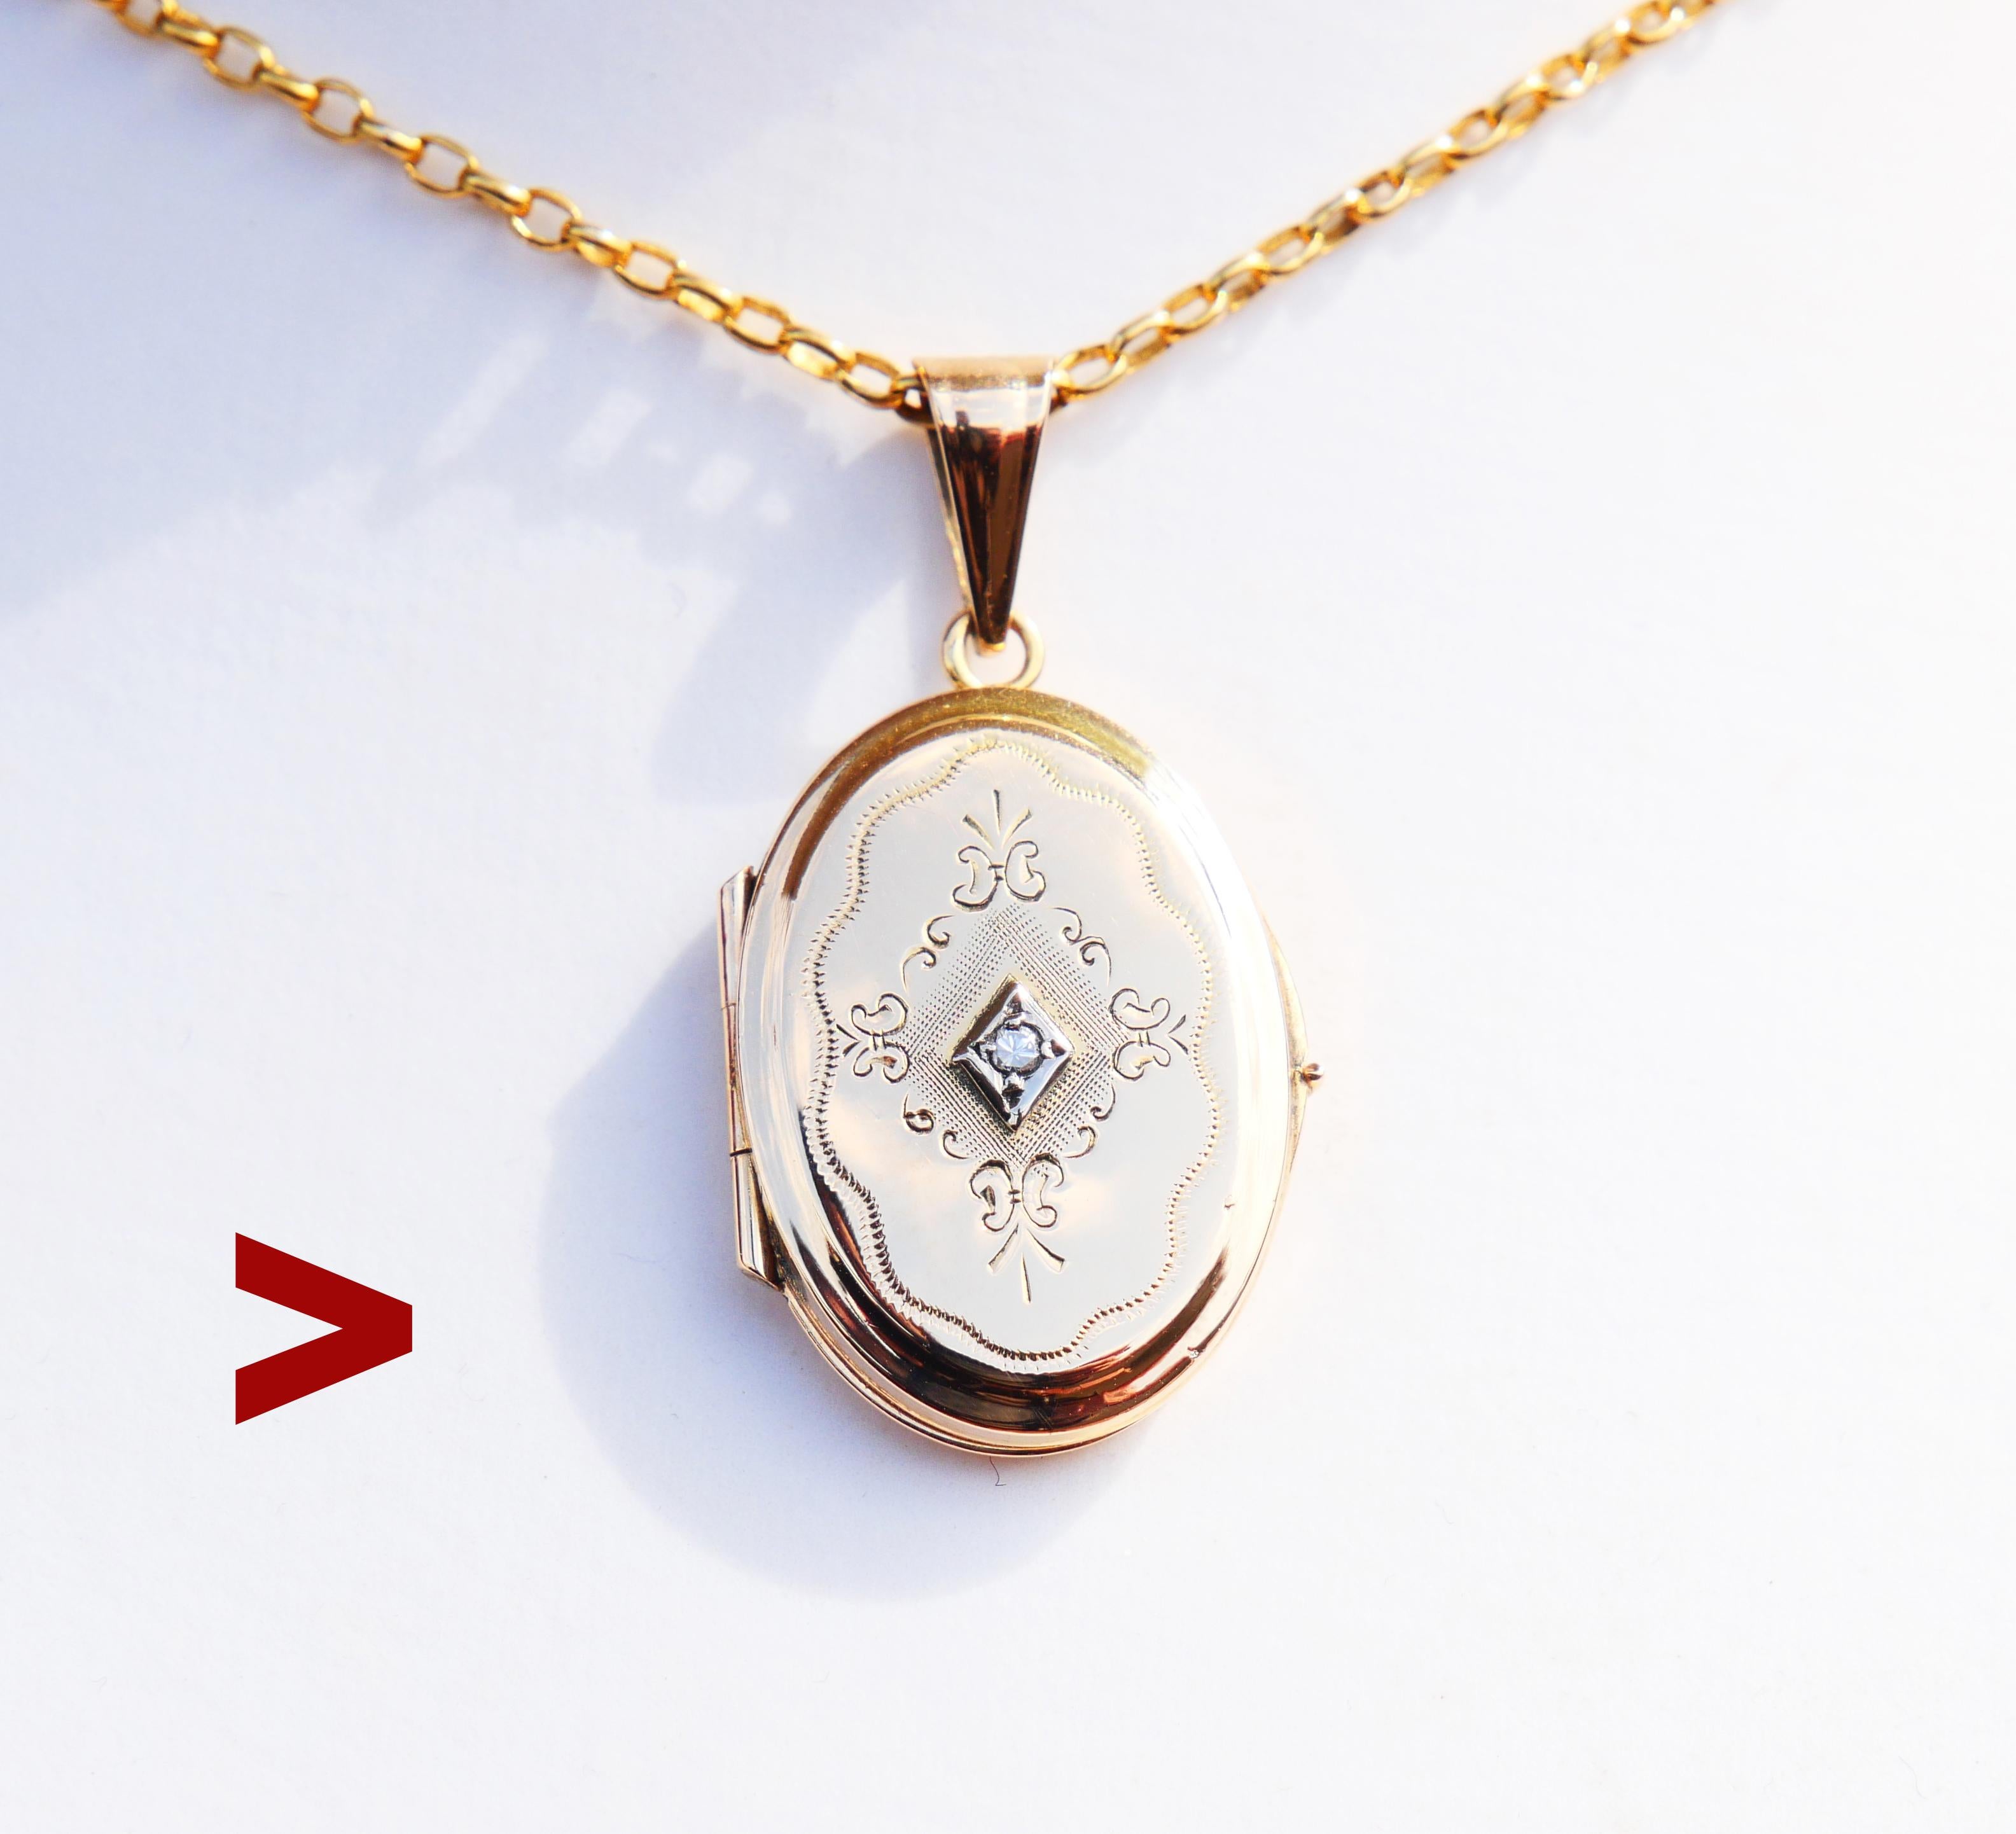 Antique 18K Yellow Gold Pendant Locket with a diamond cut Diamond in white Gold rhombus shaped bezel. Hand-engraved ornament on the front side.

Swedish pendant. Marked 18K. No hallmarks of the year.

Length is 33 mm including hanger x 17 mm x 4.5